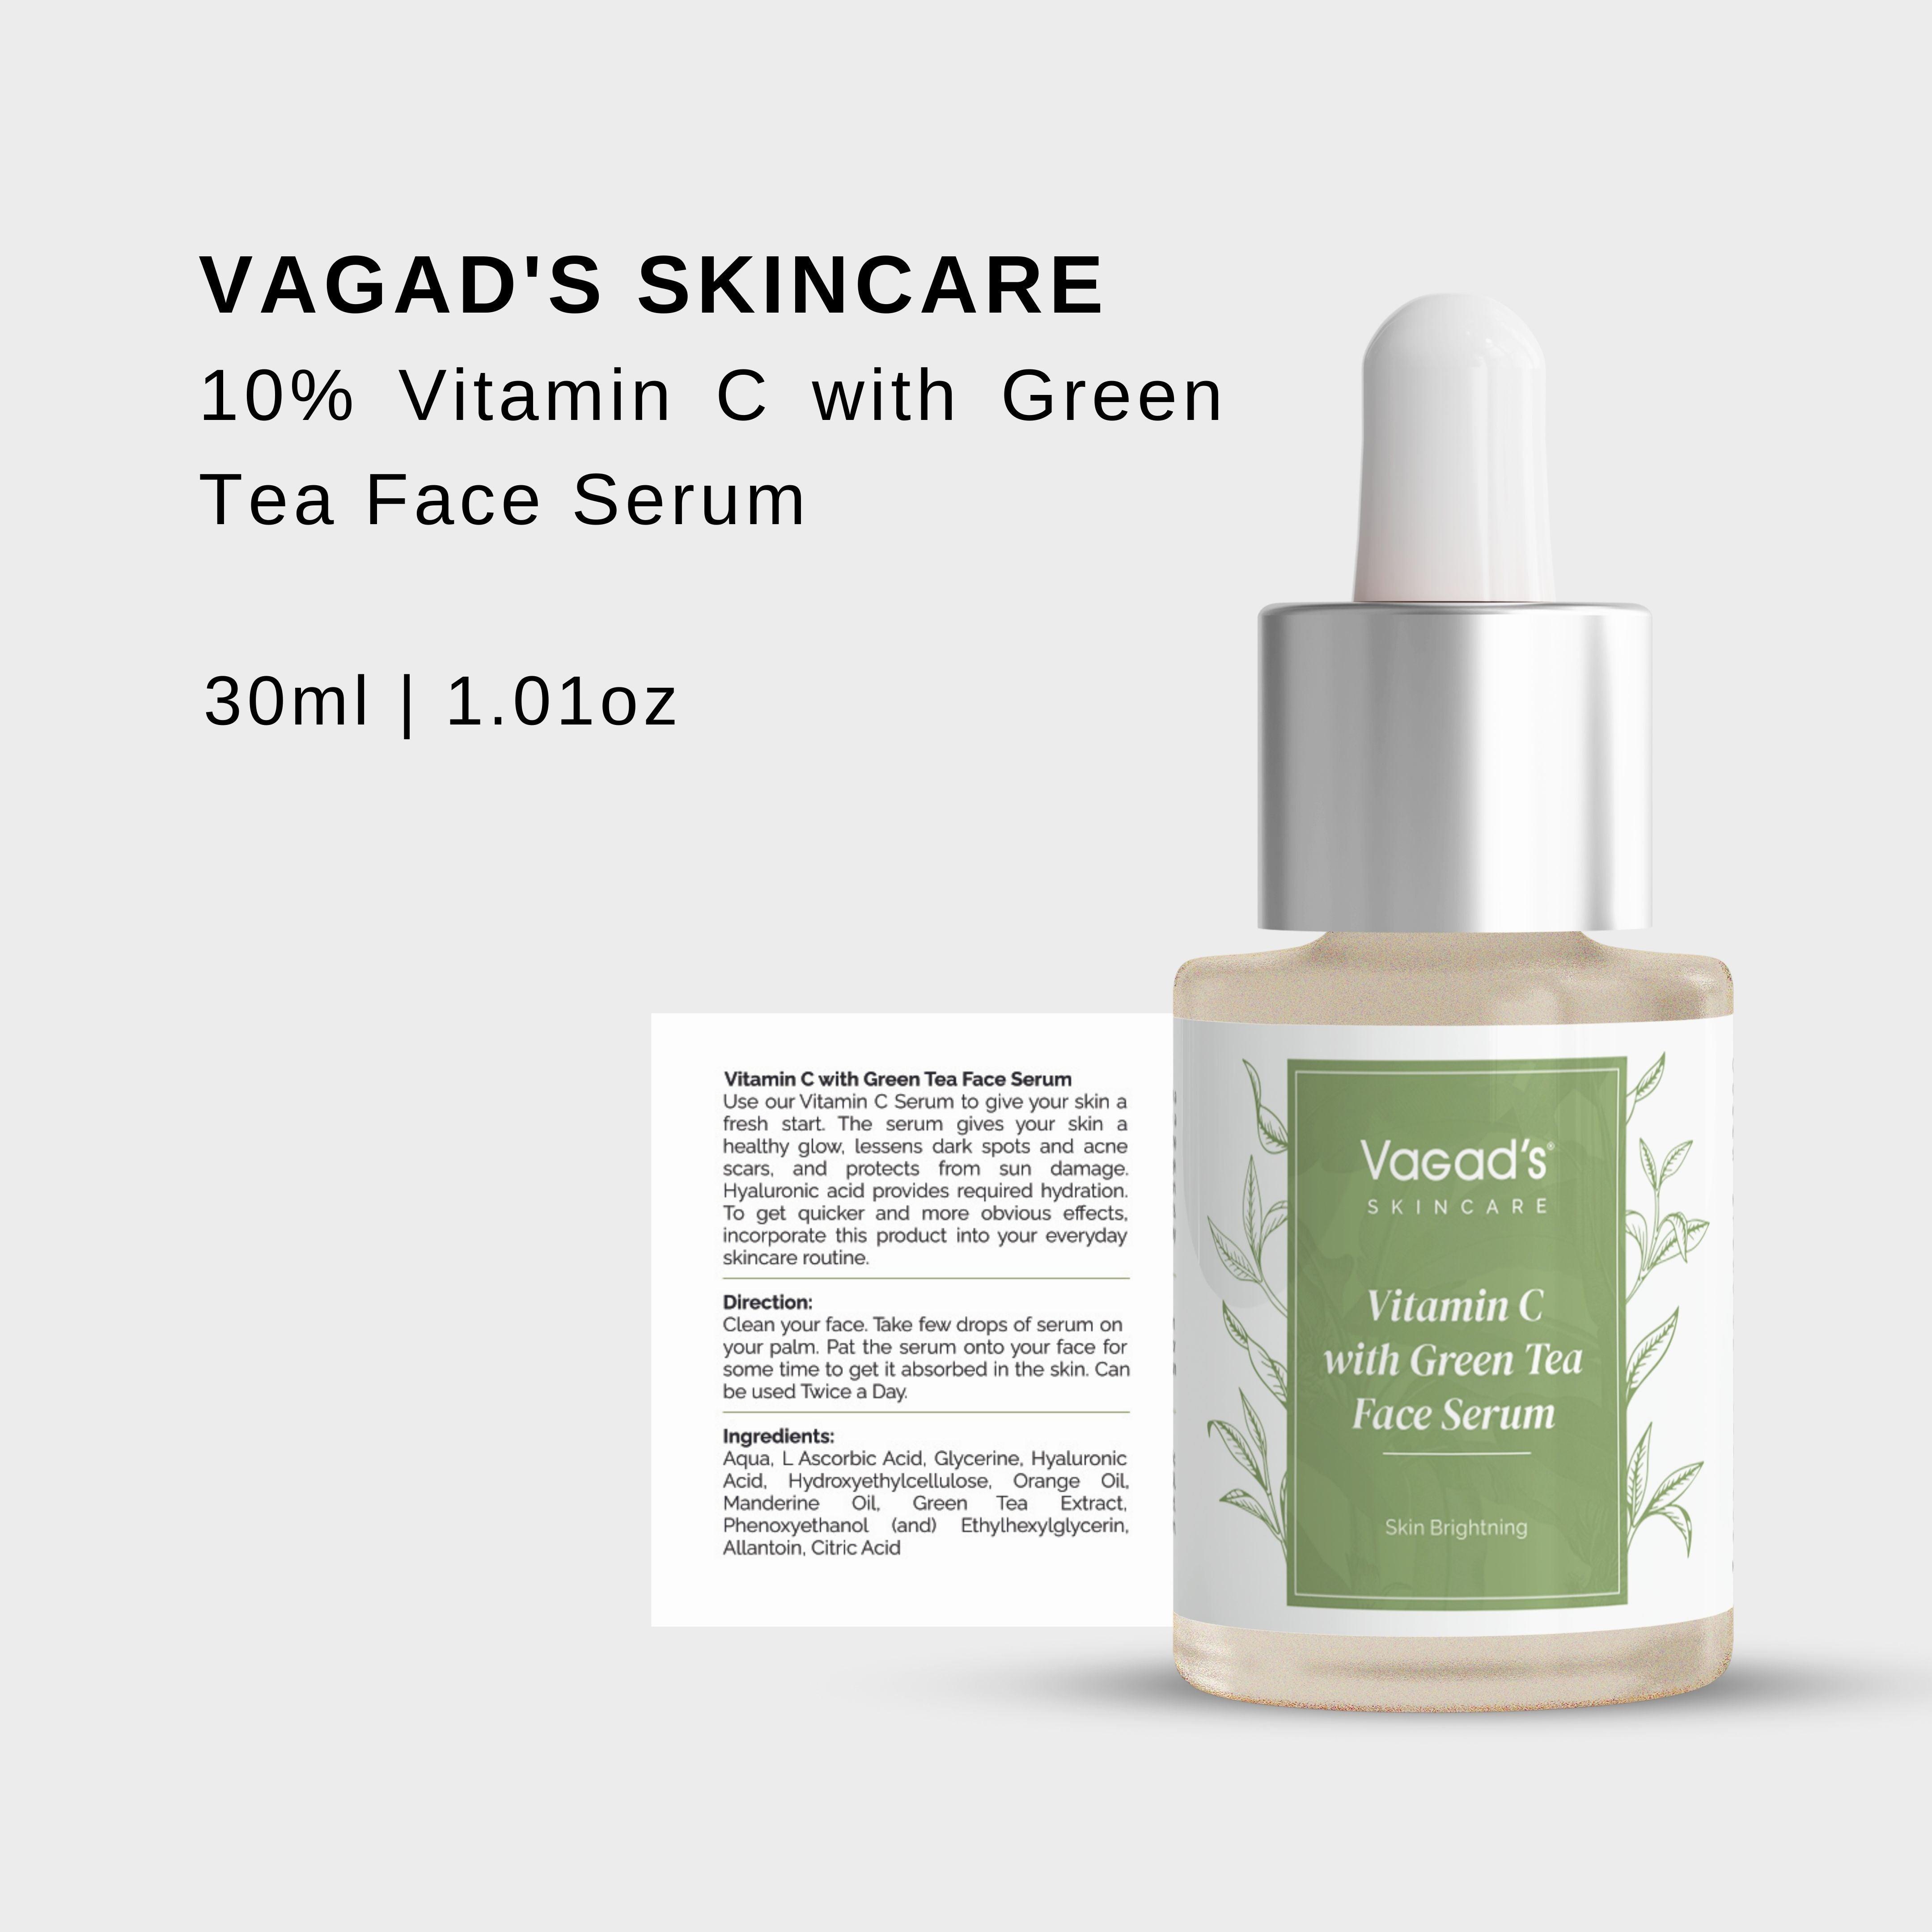 A bottle of Vagads Vitamin C with Green Tea Face Serum, a skin brightening product.